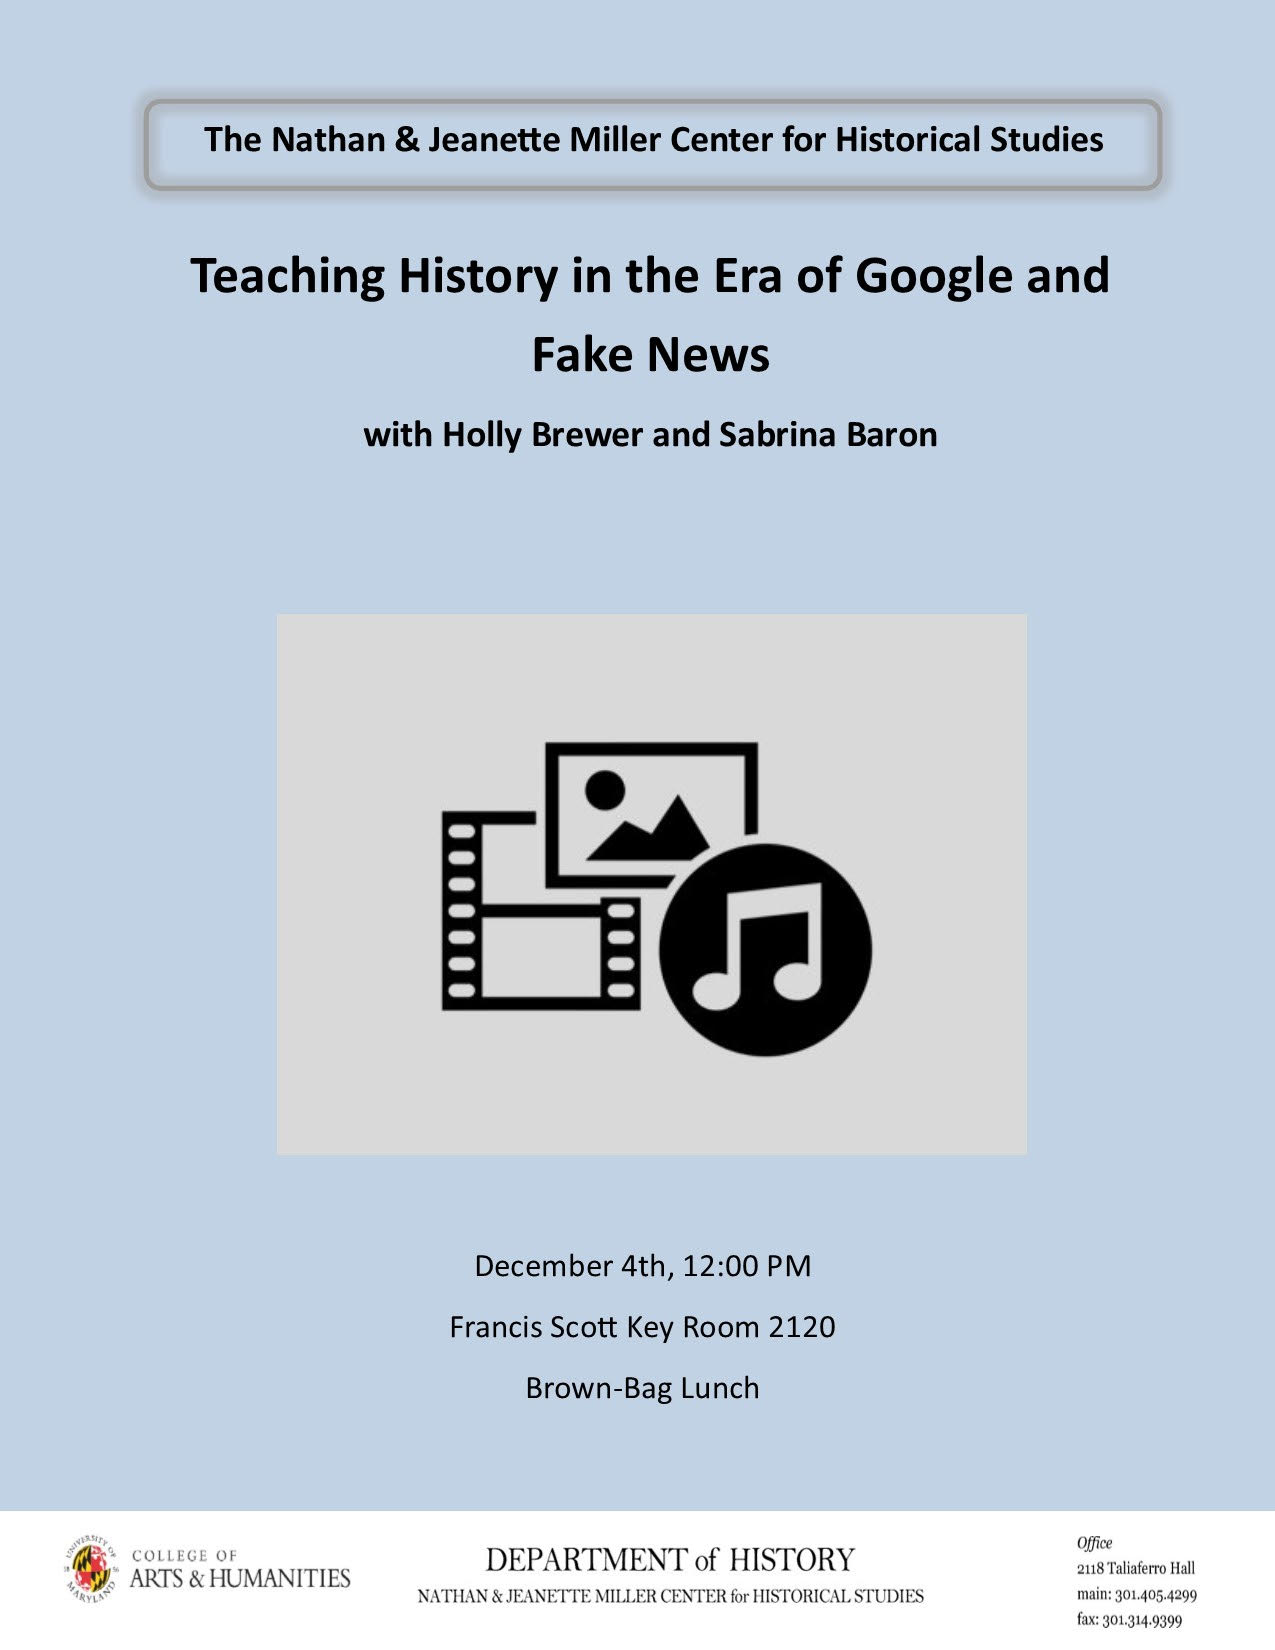 Image for event - Teaching History in the Era of Google and Fake News